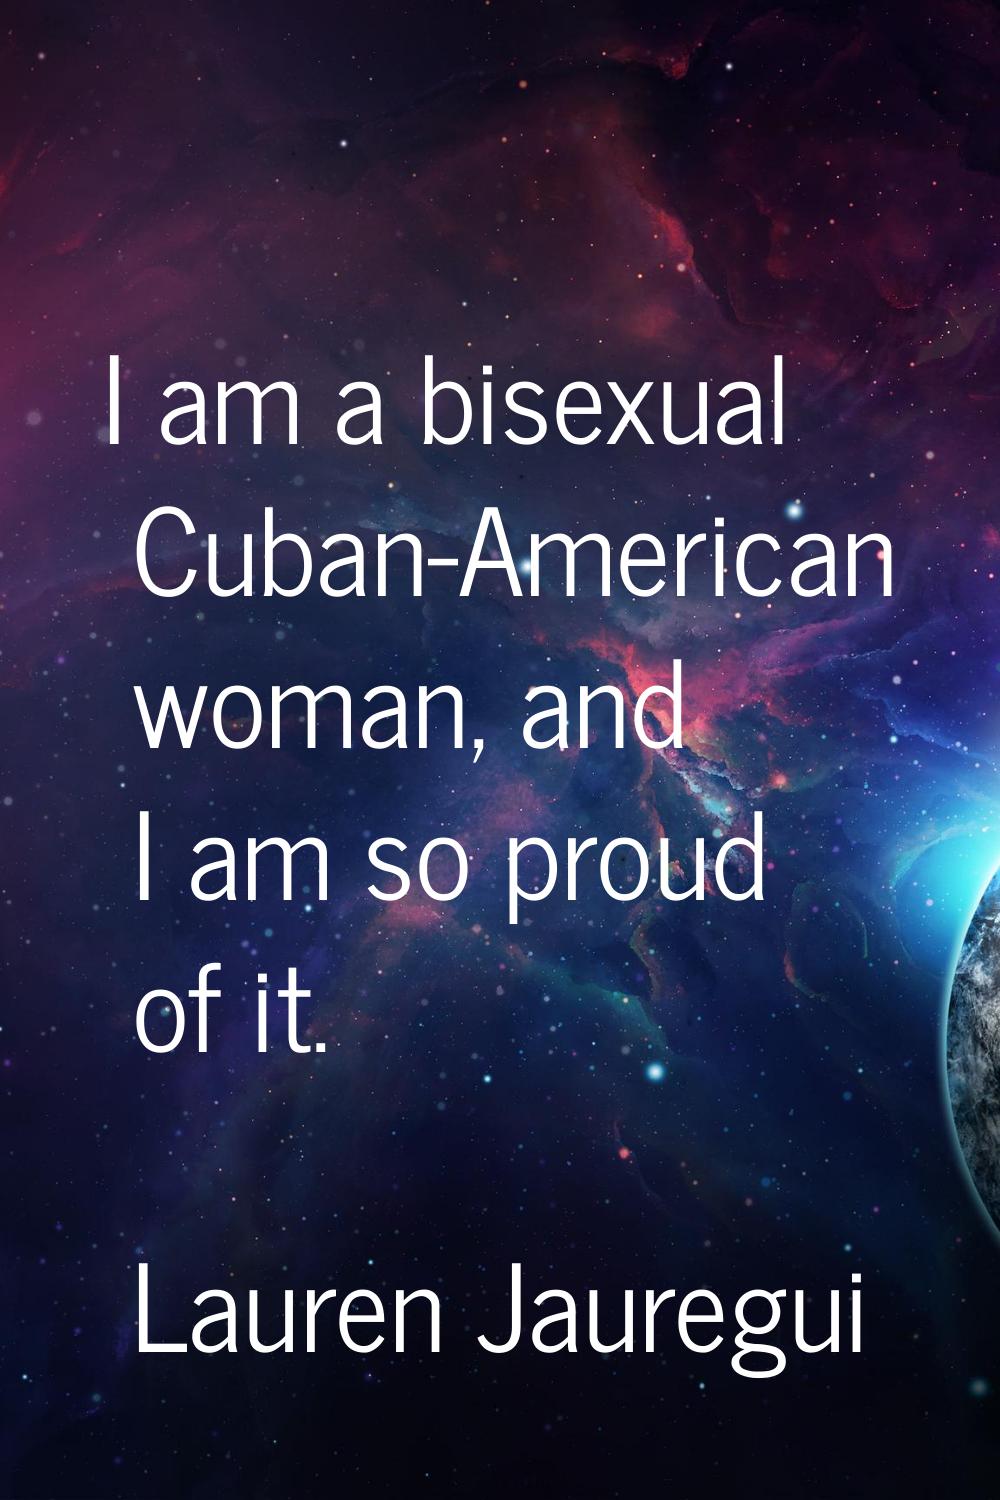 I am a bisexual Cuban-American woman, and I am so proud of it.